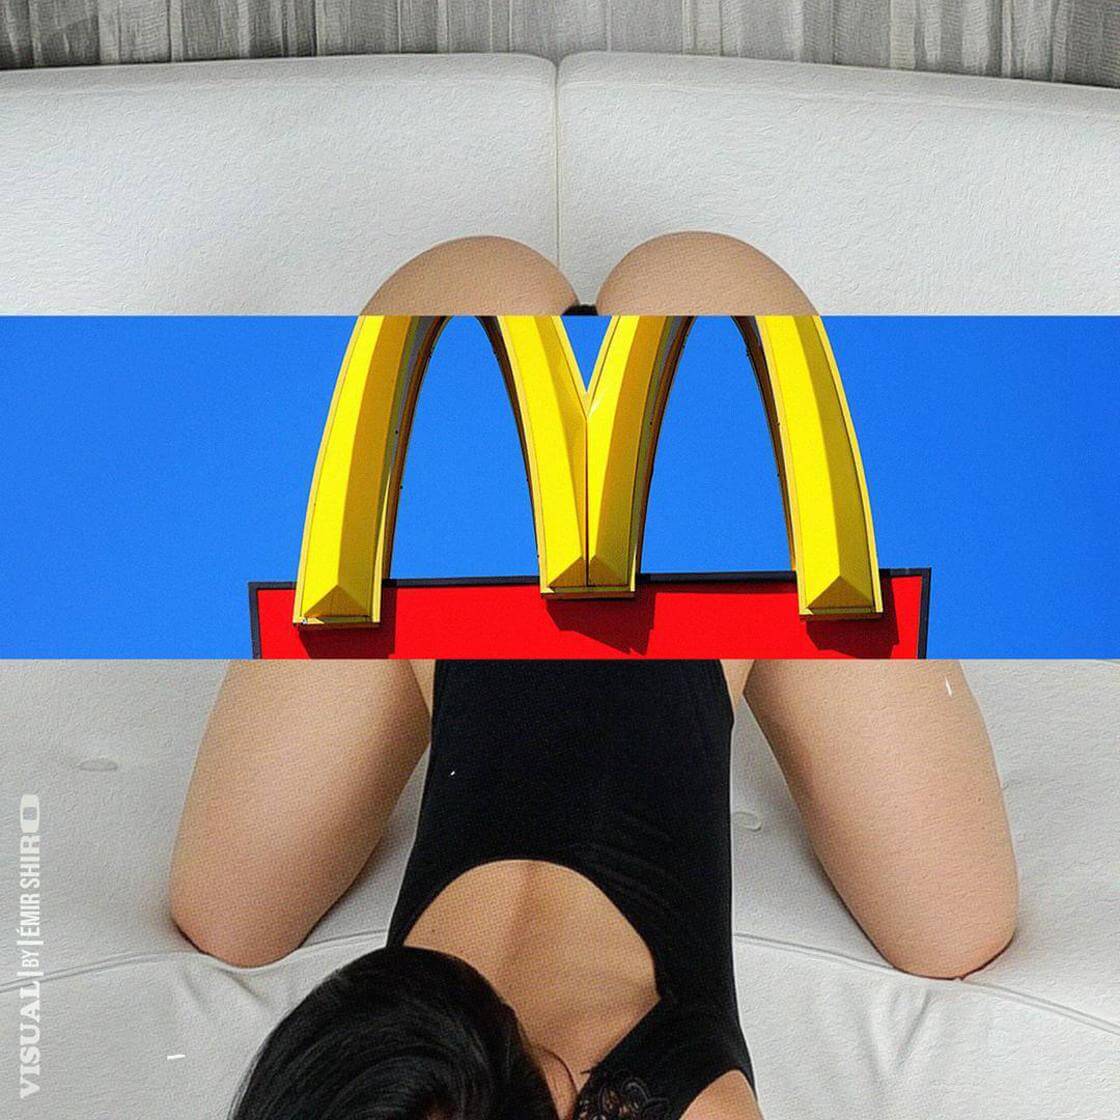 French Artist Creates Sensual Collages And Conquers Online Censorship